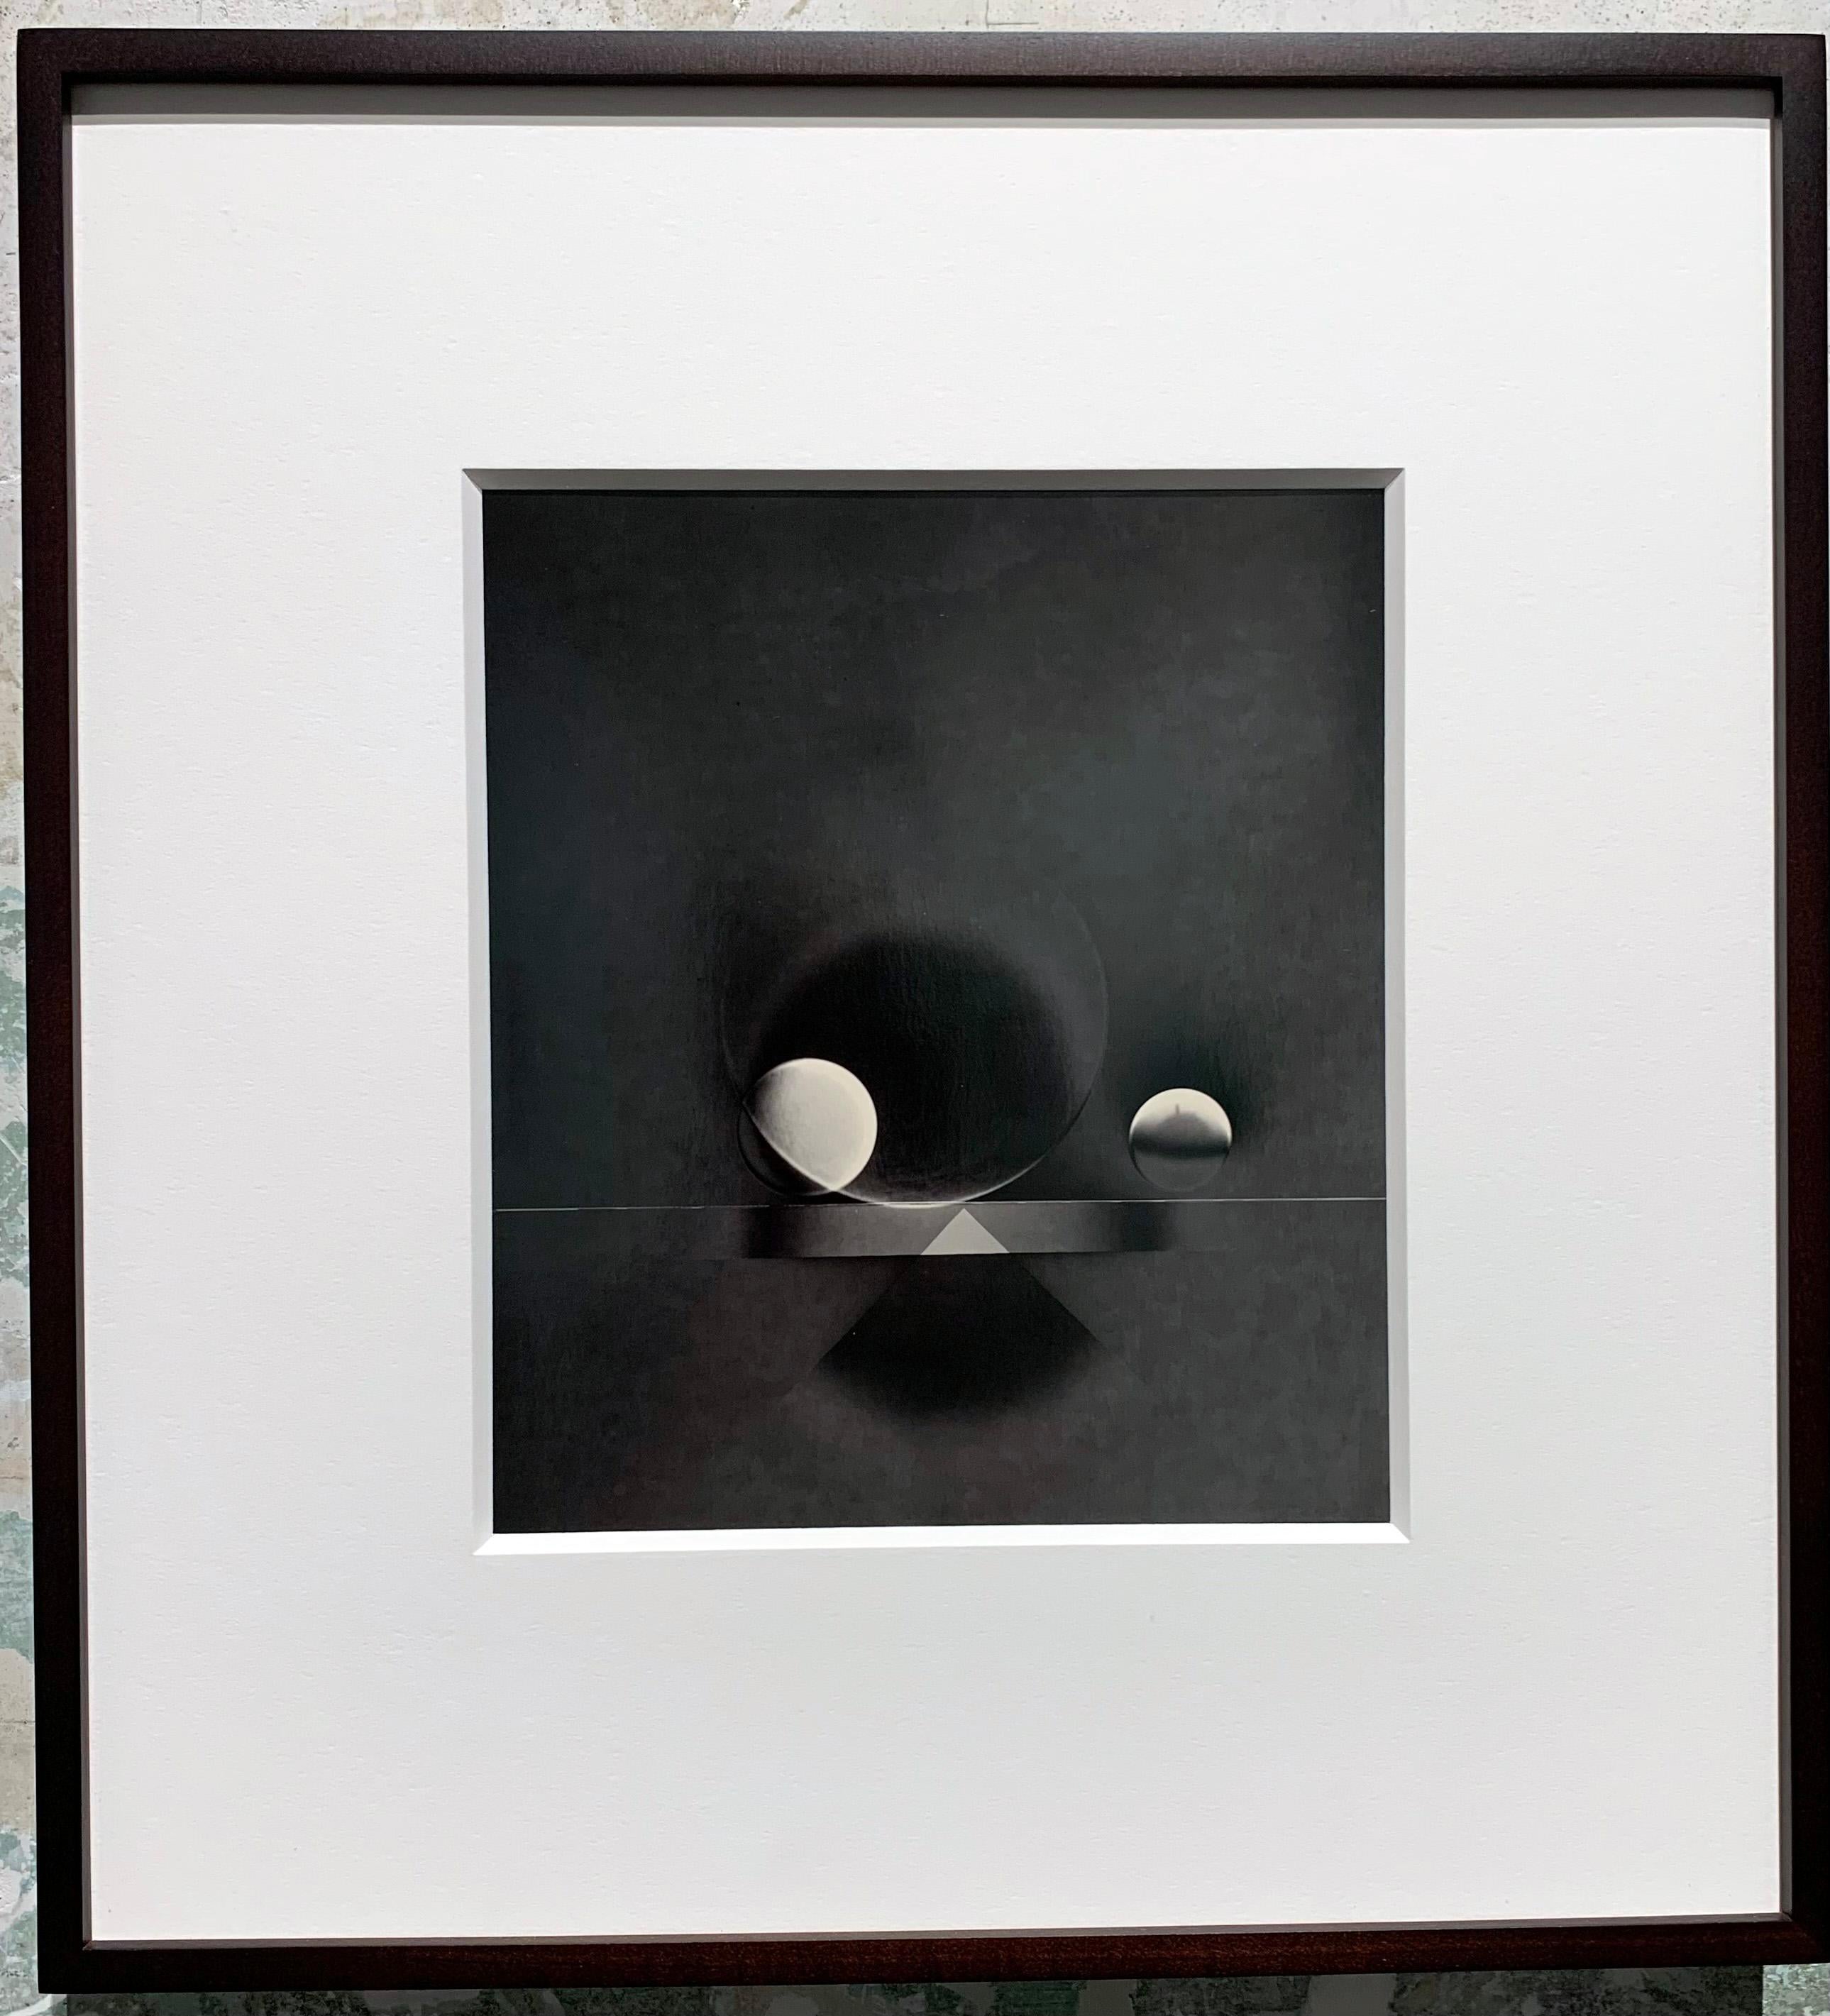 ATO>MIC #13, Unique Silver Luminogram Print, Two spheres and triangle with shade - Noir Abstract Print par Michael G Jackson 